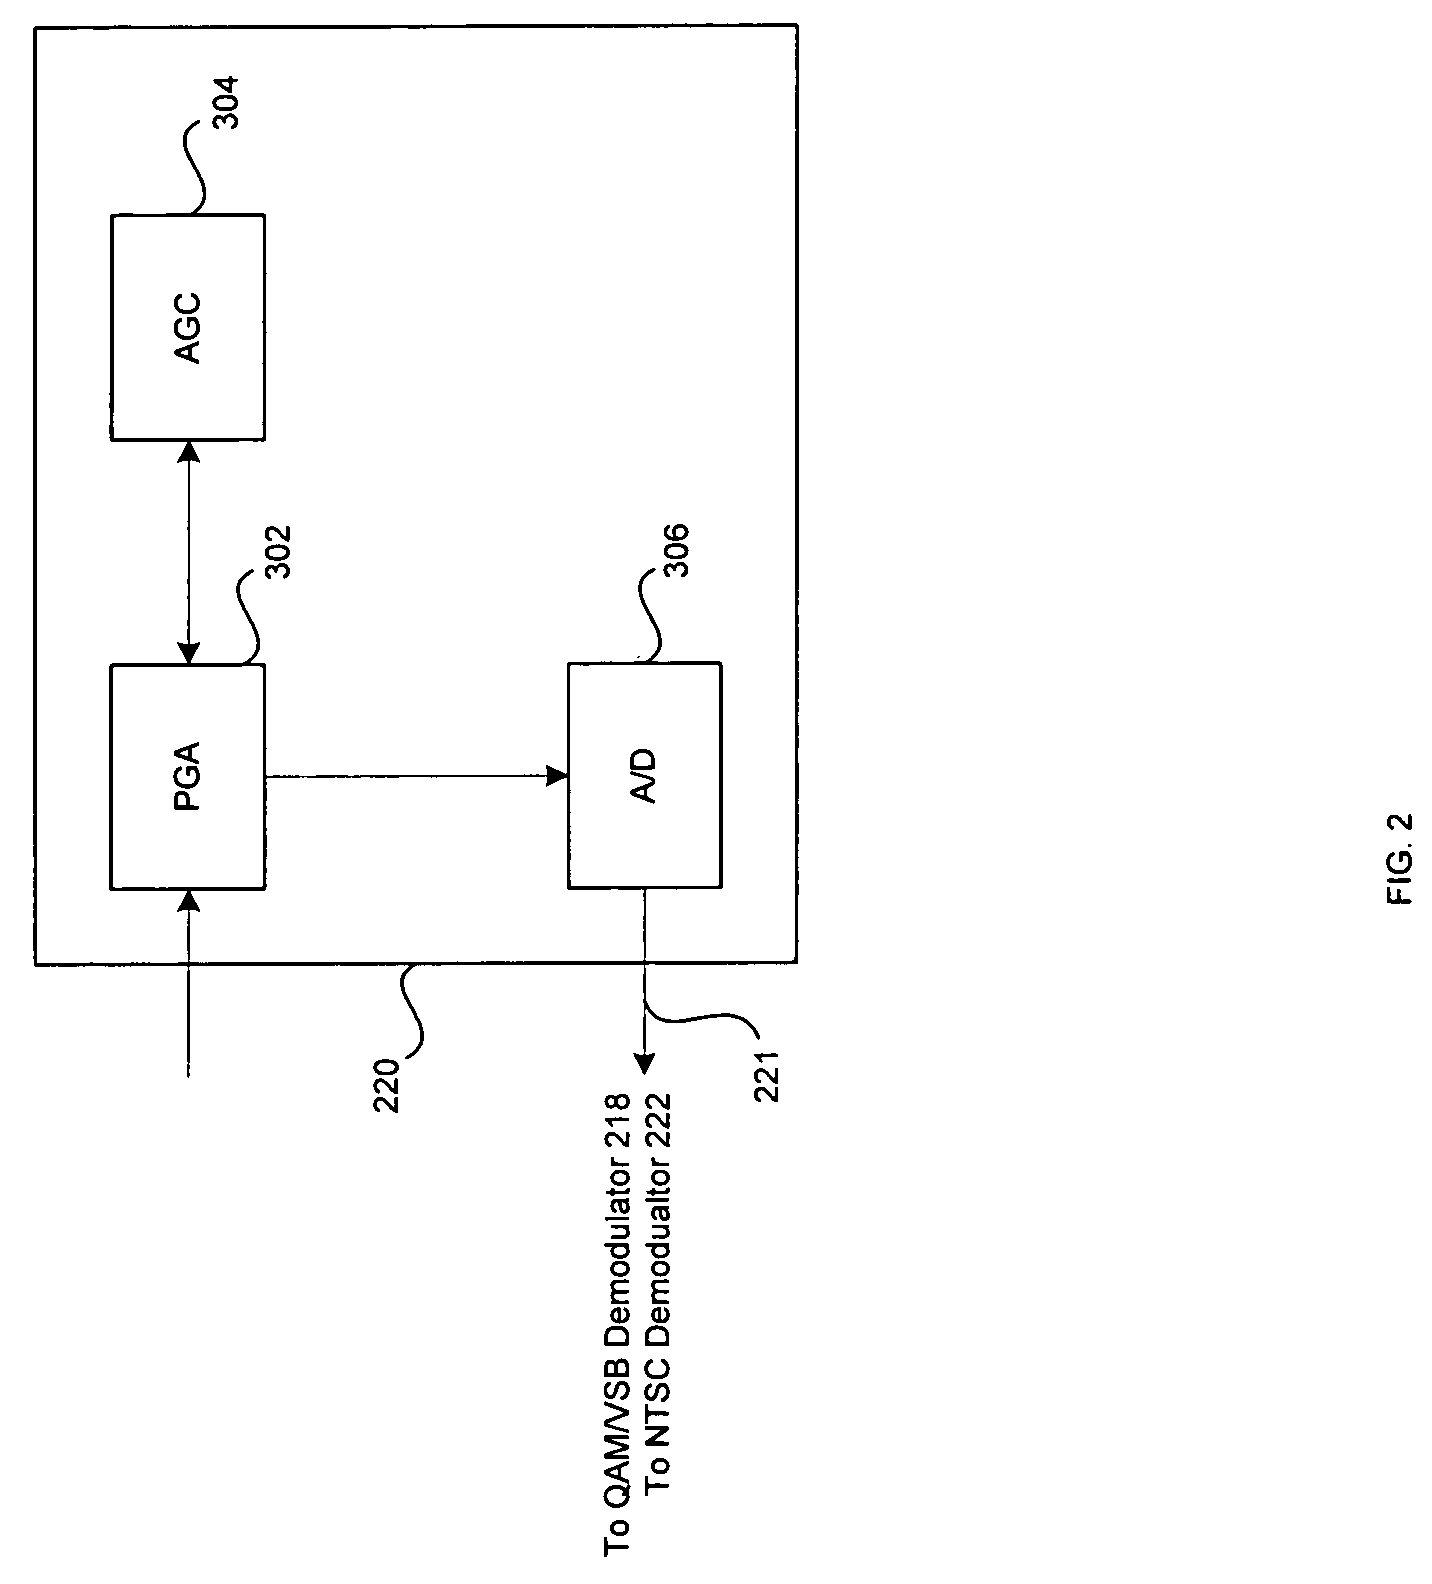 HDTV chip with a single IF strip for handling analog and digital reception